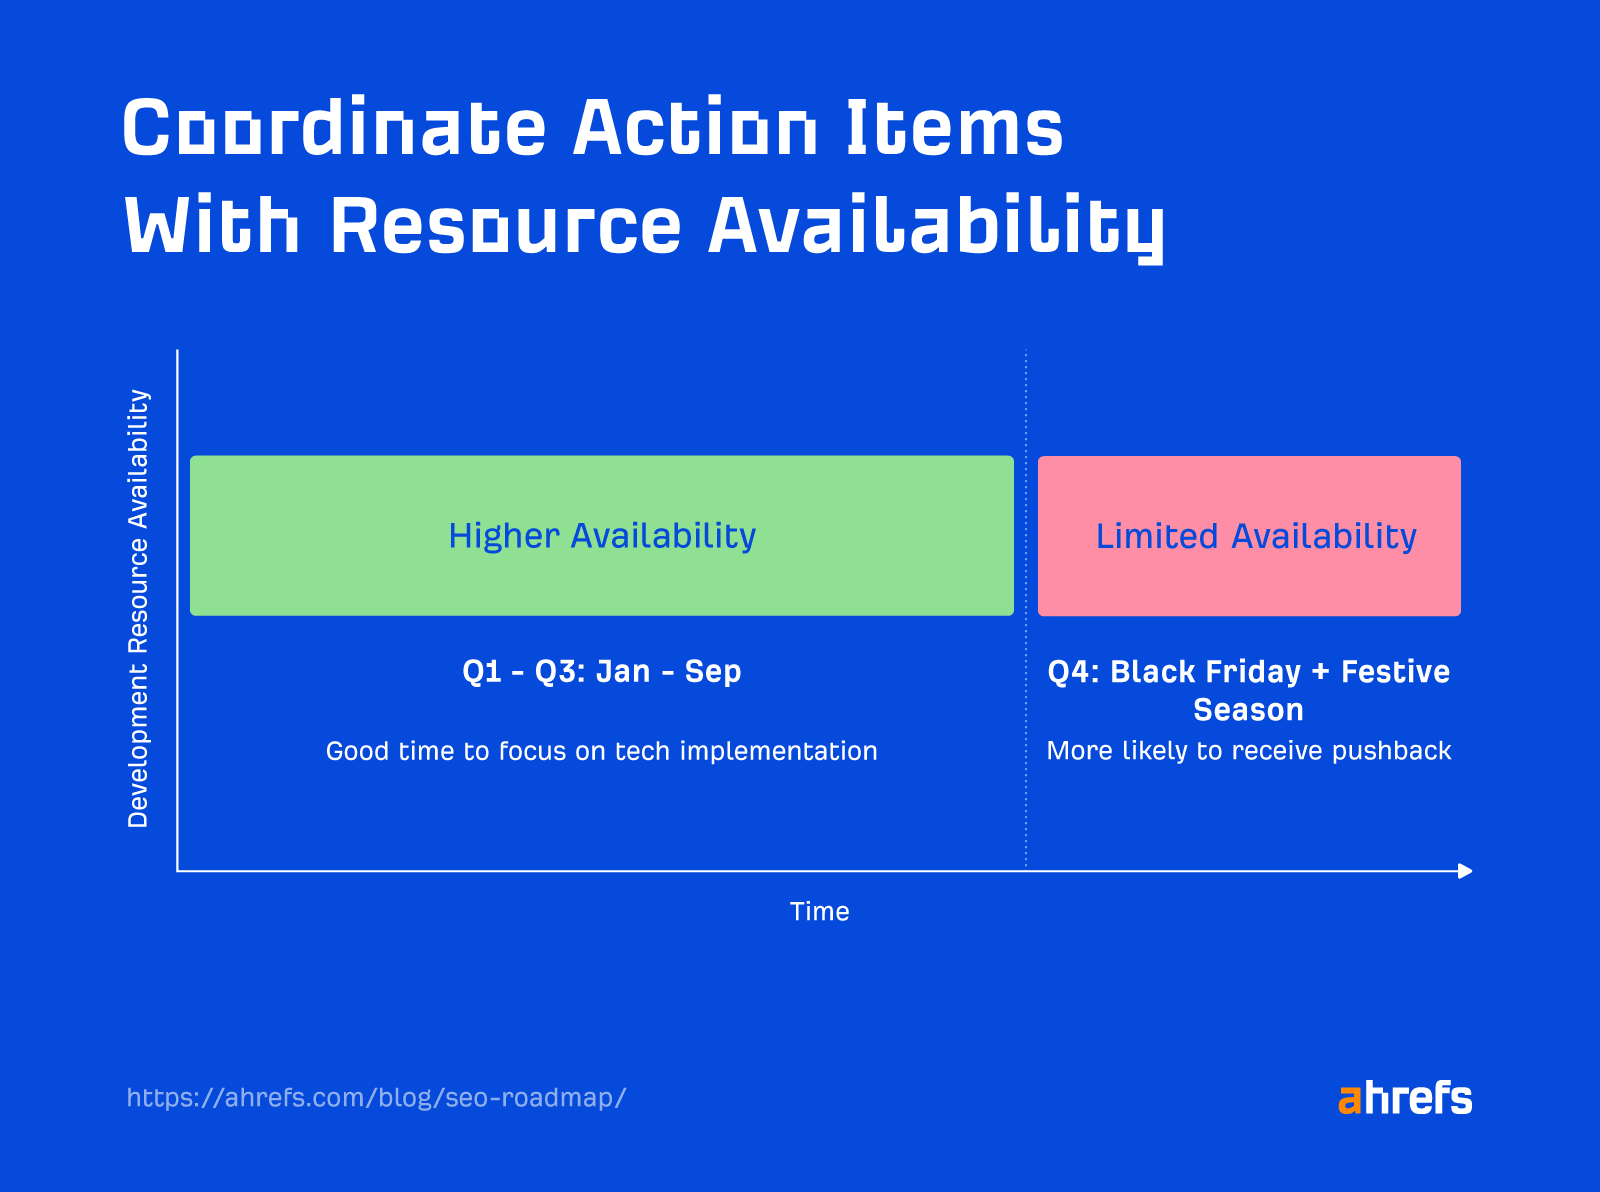 Coordinate action items with available resource